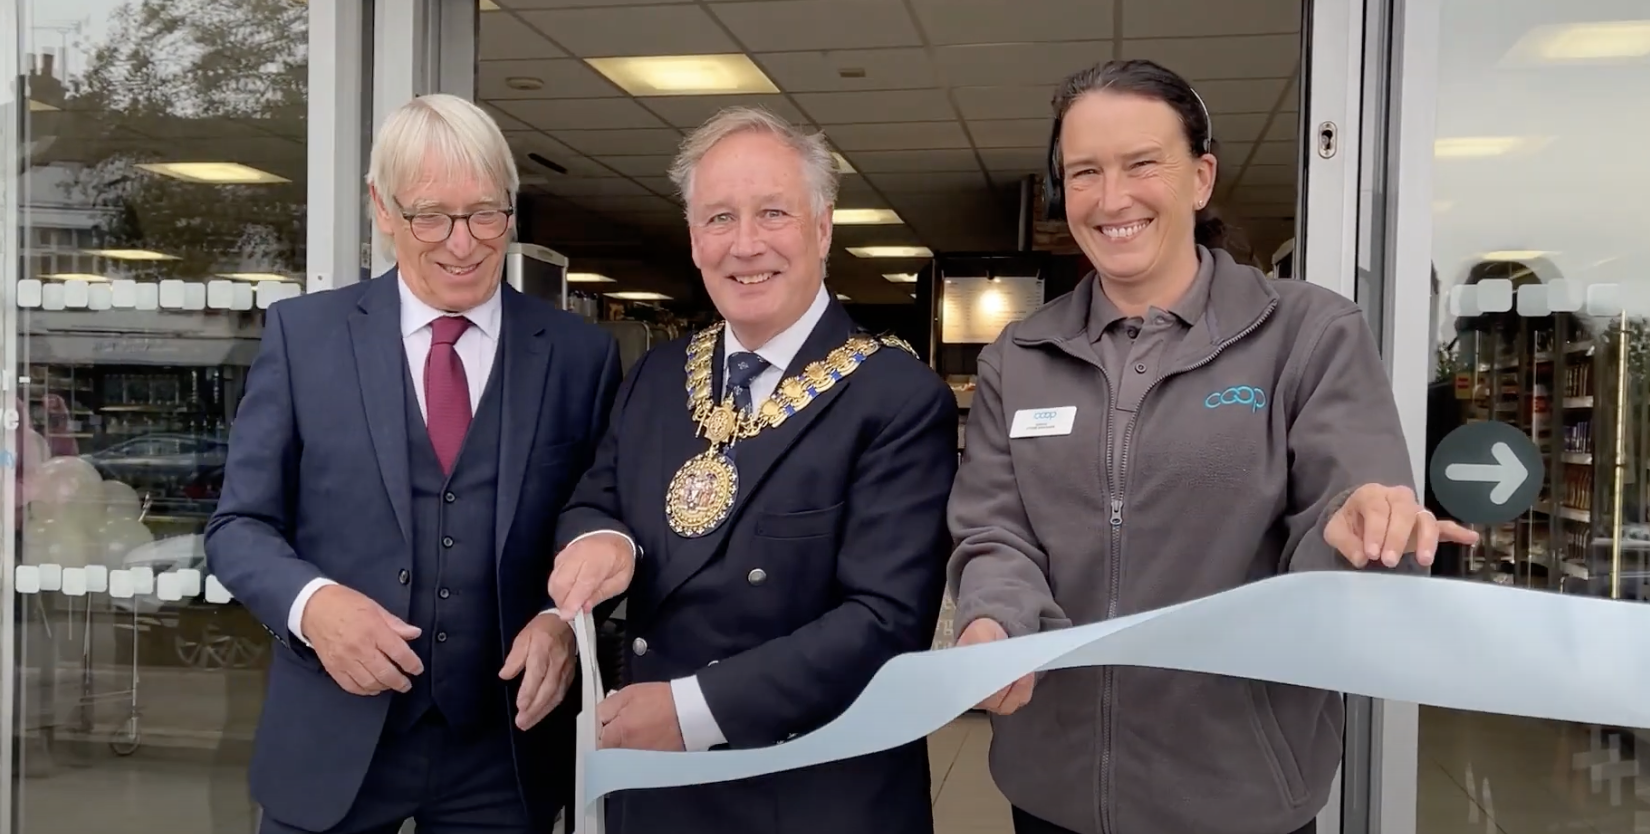 Leigh On Sea News. Leigh Co-op reopened - The Mayor of Southend reopened the Leigh Co-op on the London Road.